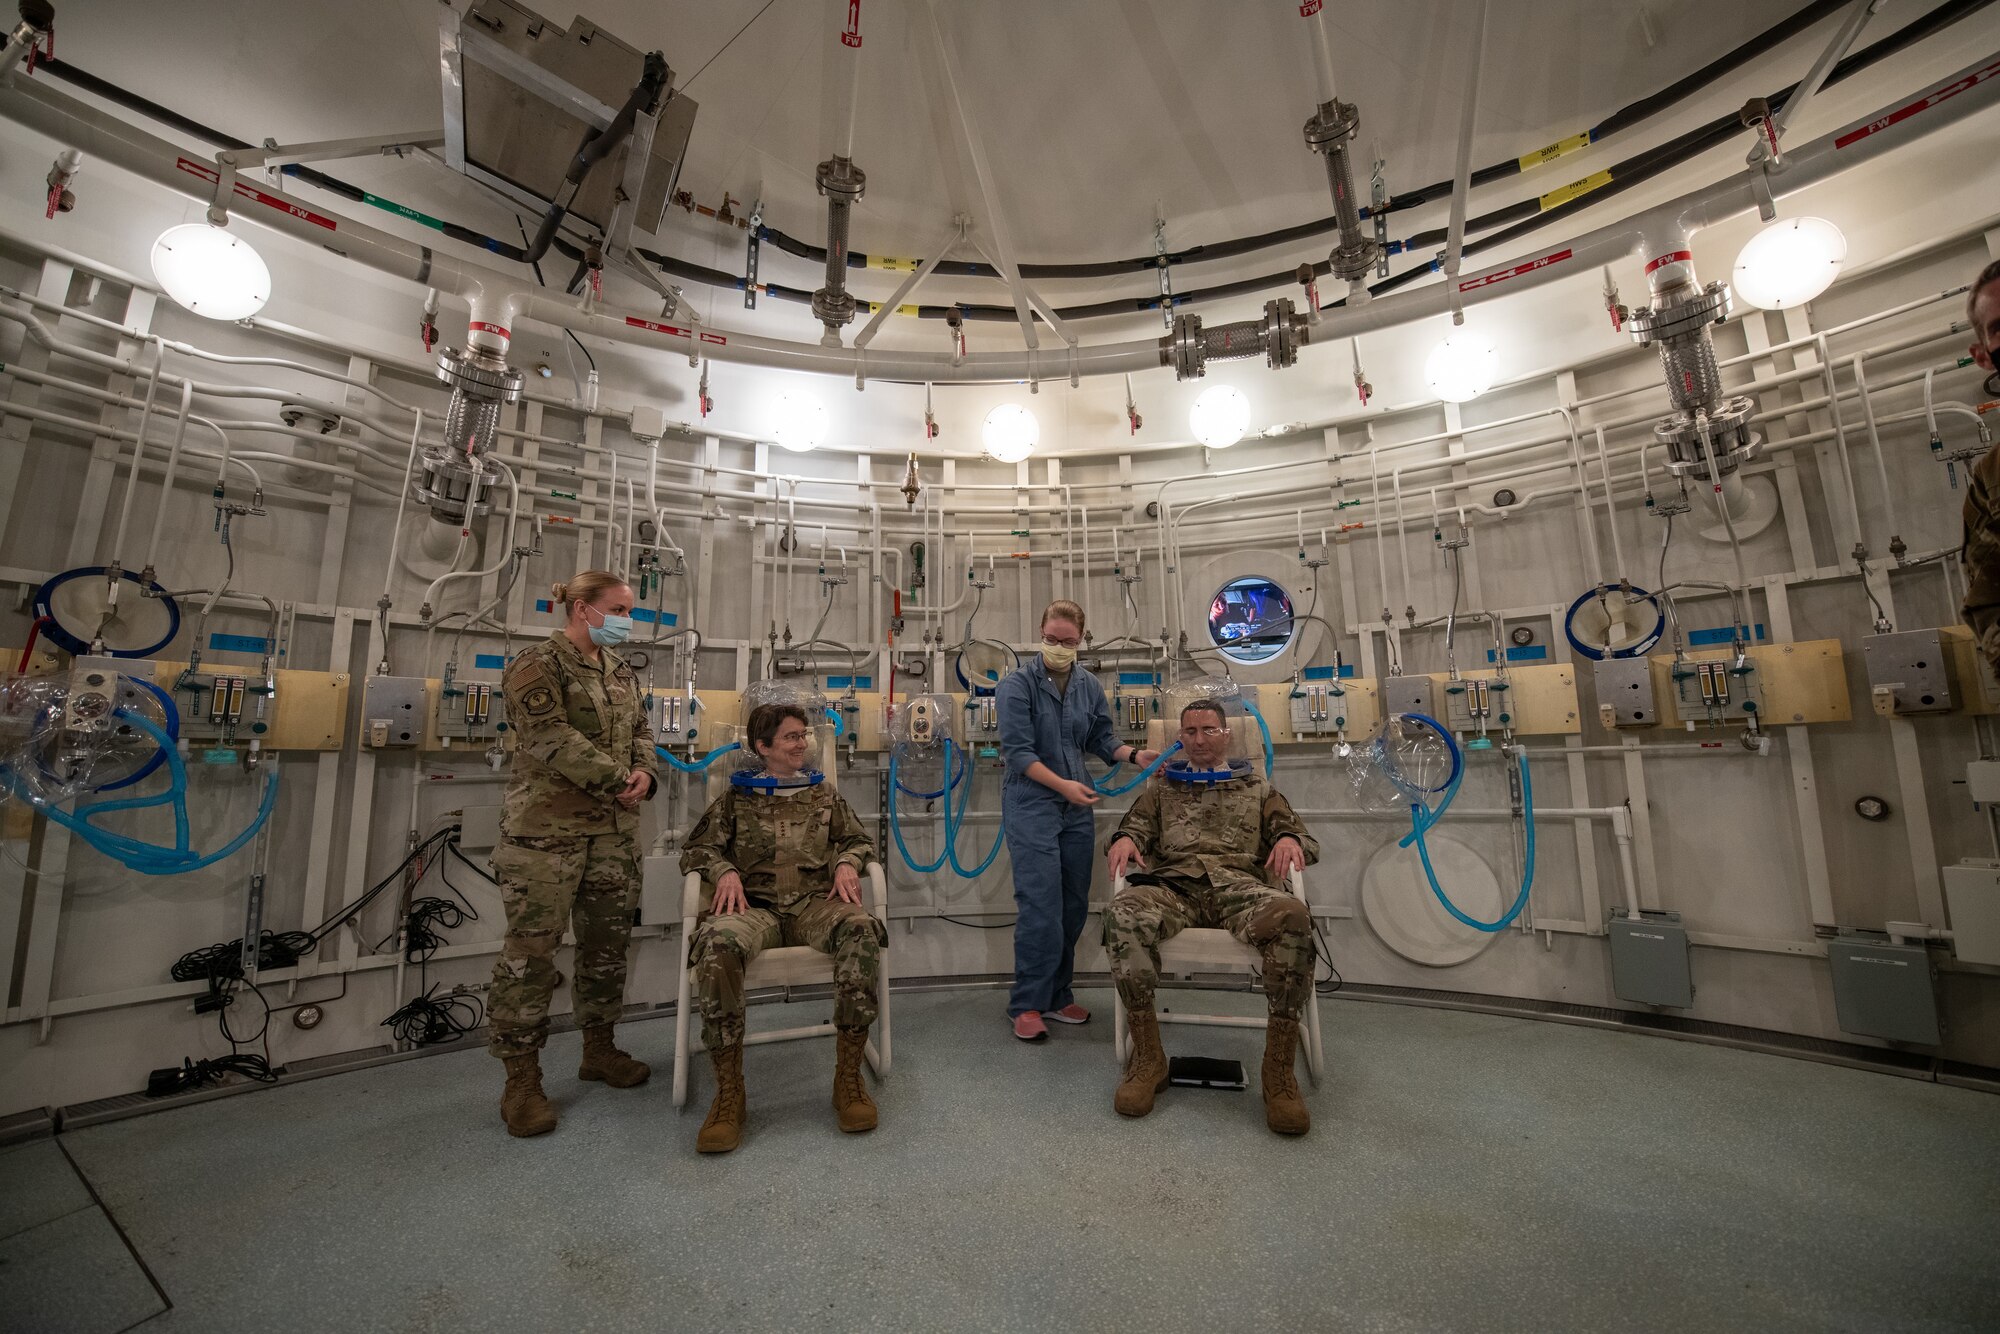 Three military members sit inside a large, circular room with a medic. All are wearing face masks. There are pipes and valves on the white walls.